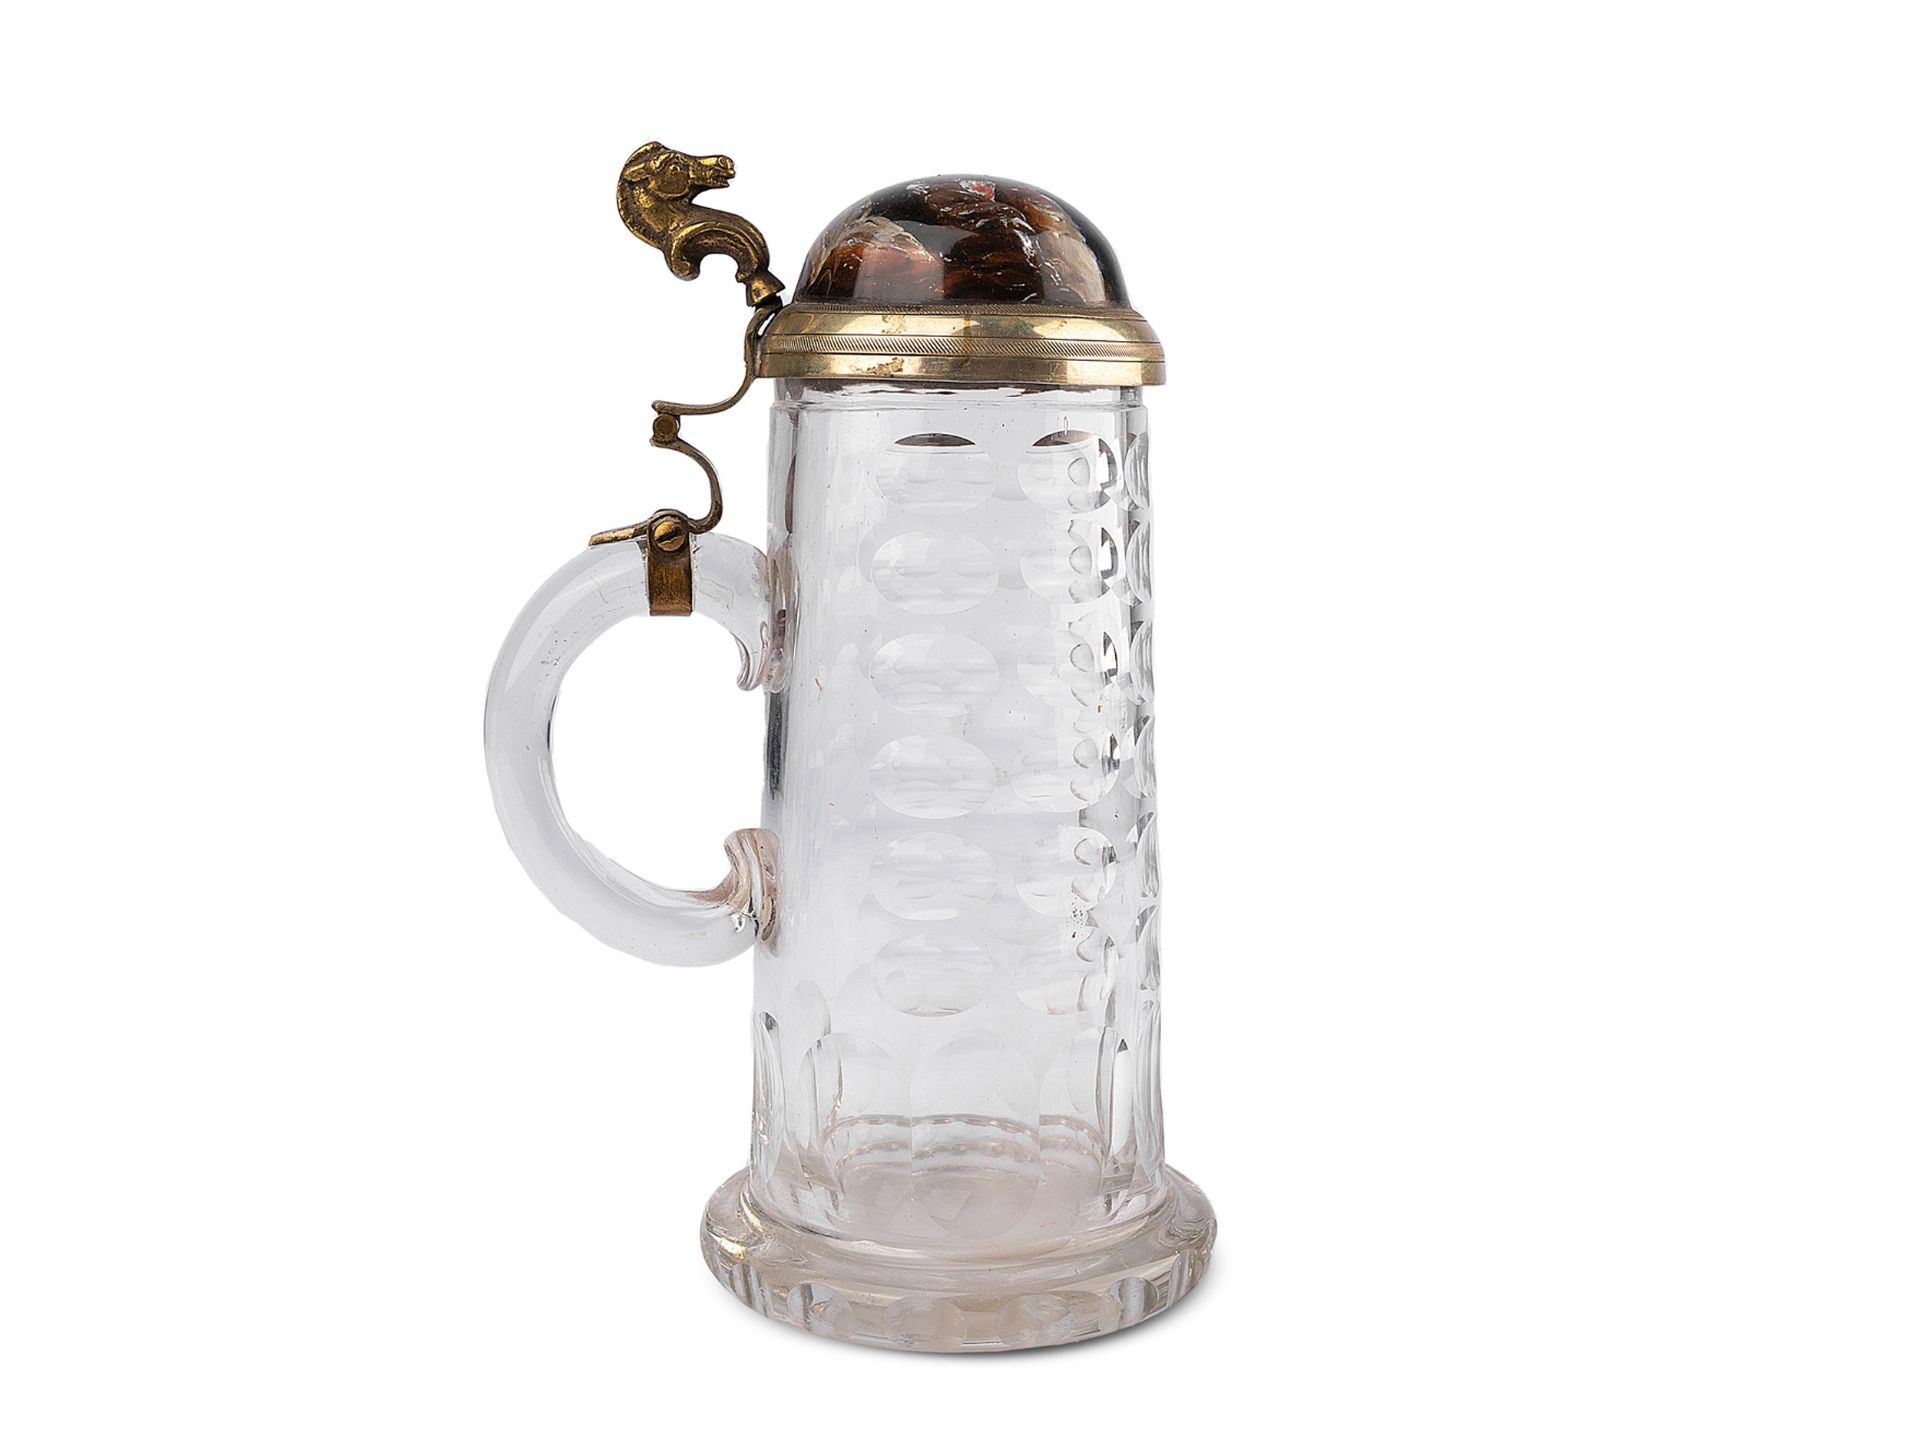 Beer jug with dog head, Glass - Image 2 of 4